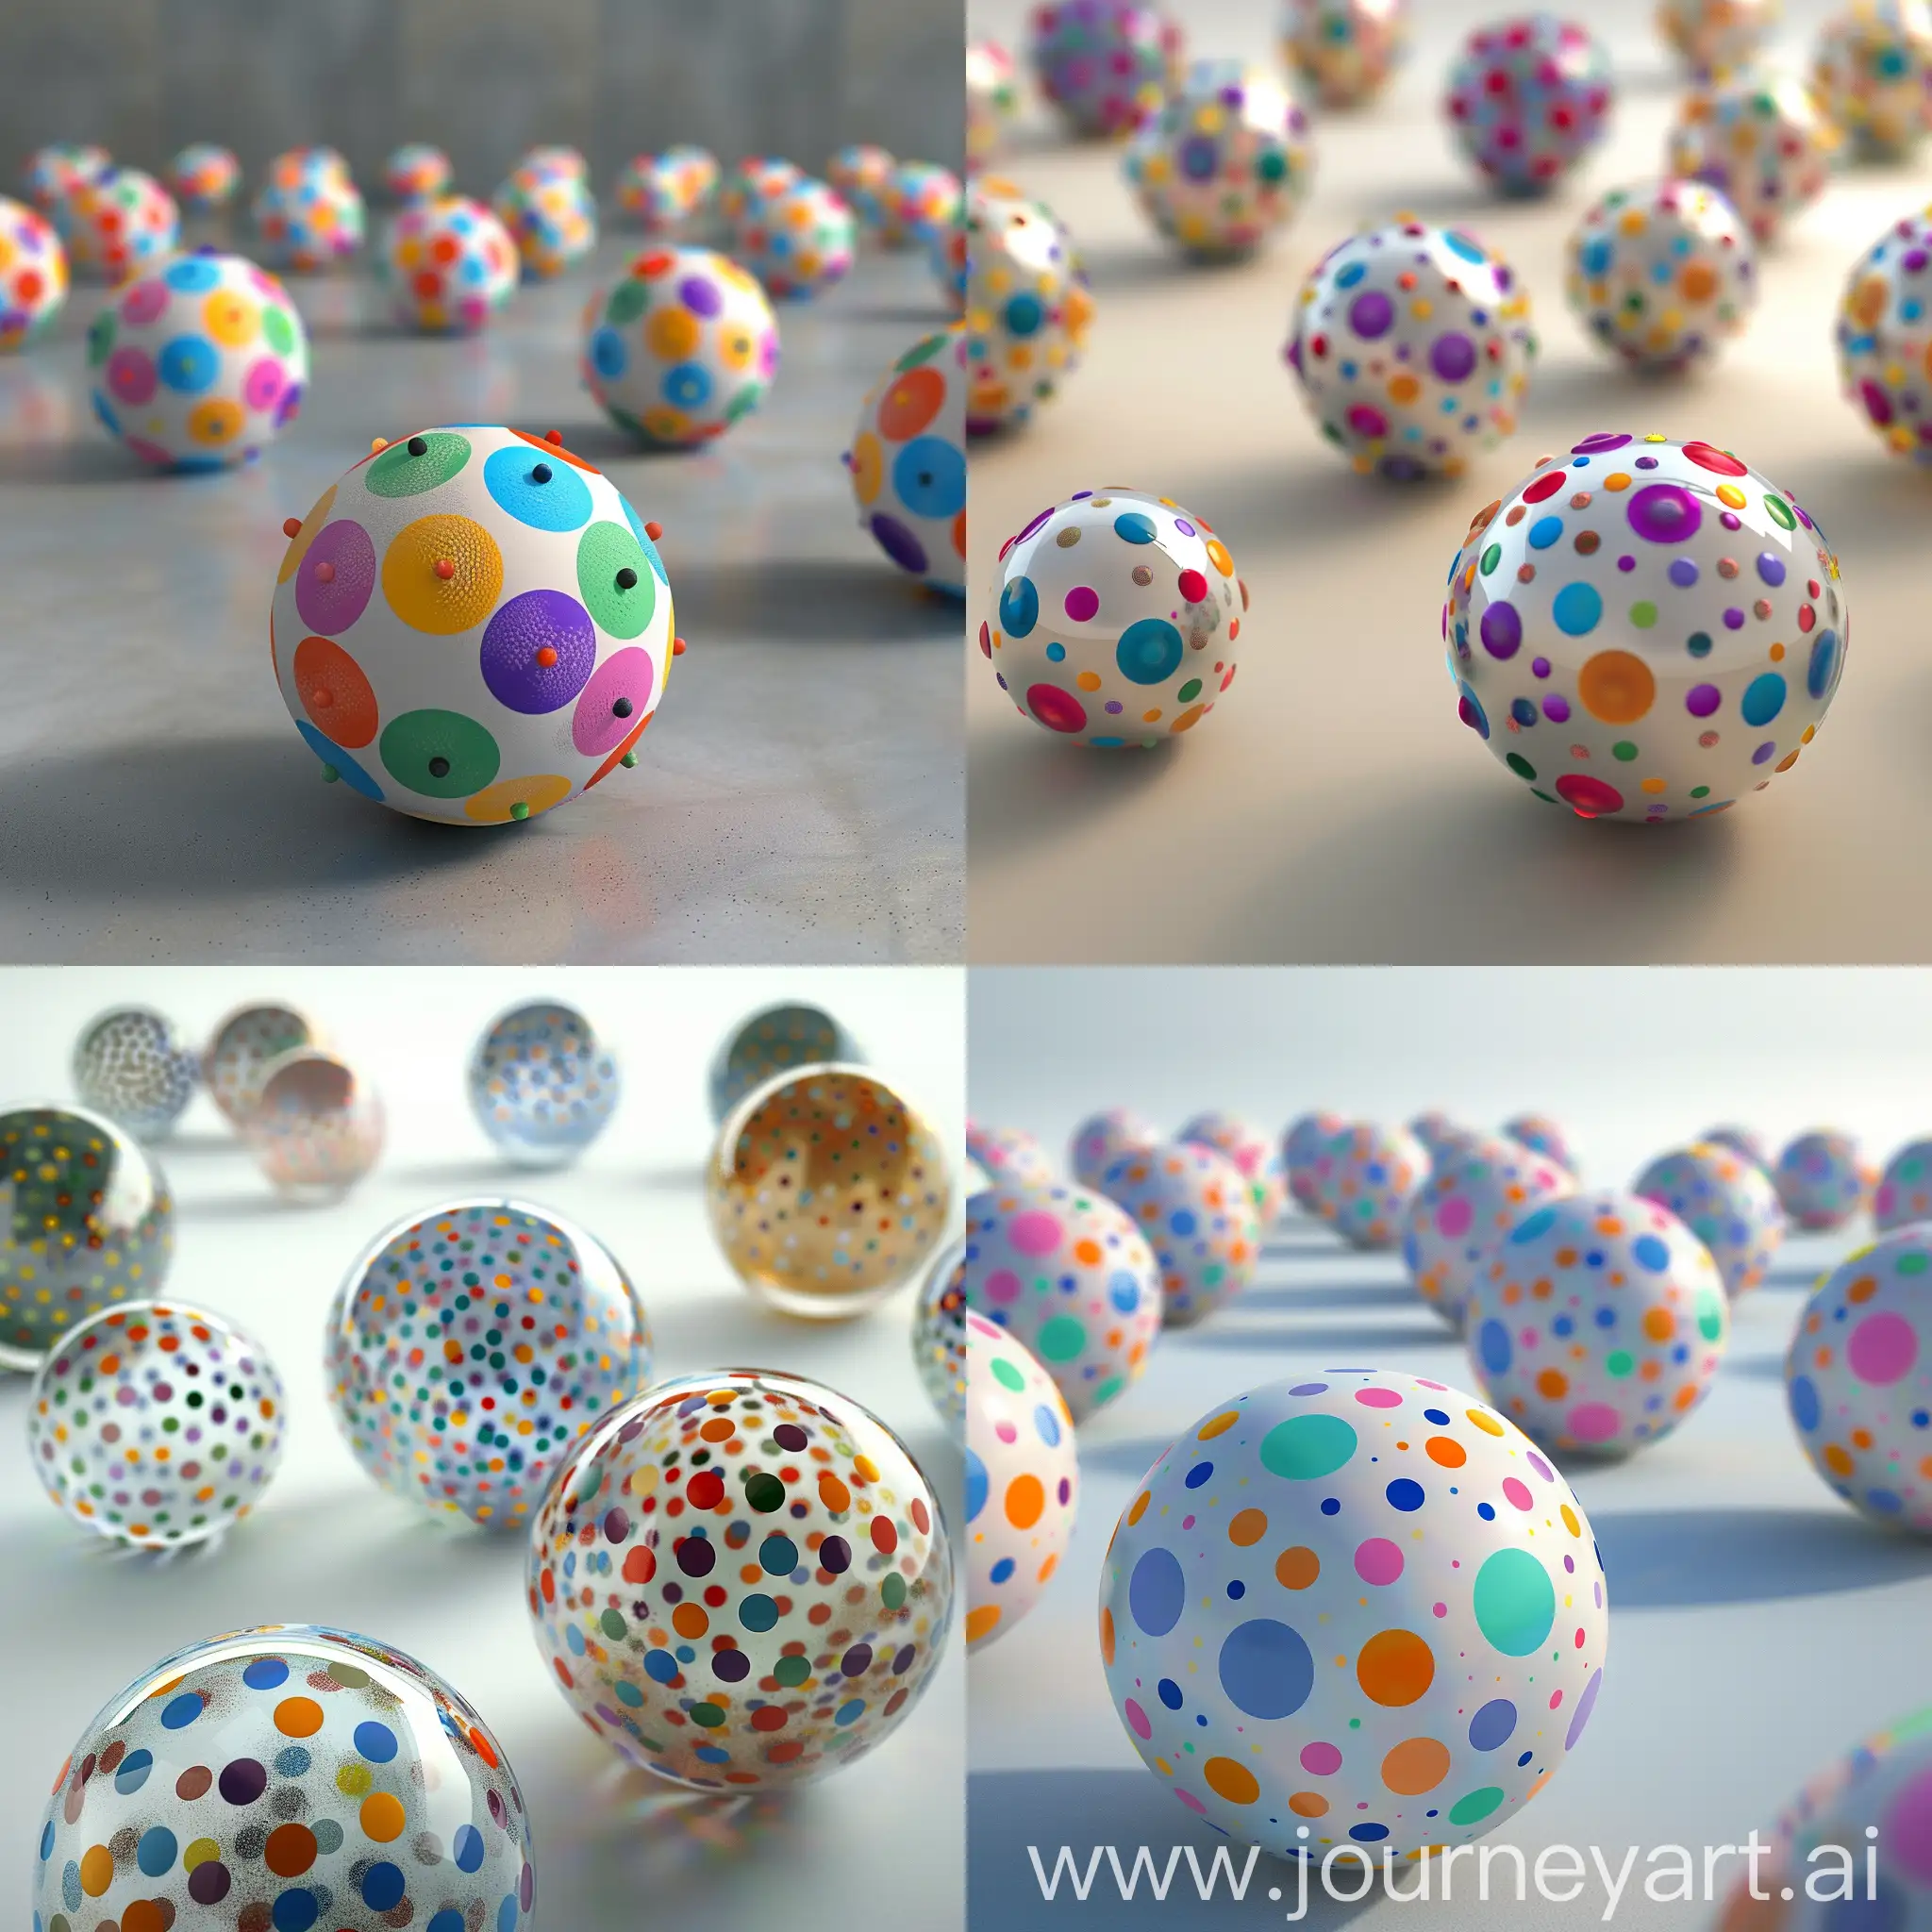 Colorful-Dotted-Spheres-Pattern-on-Plain-Surface